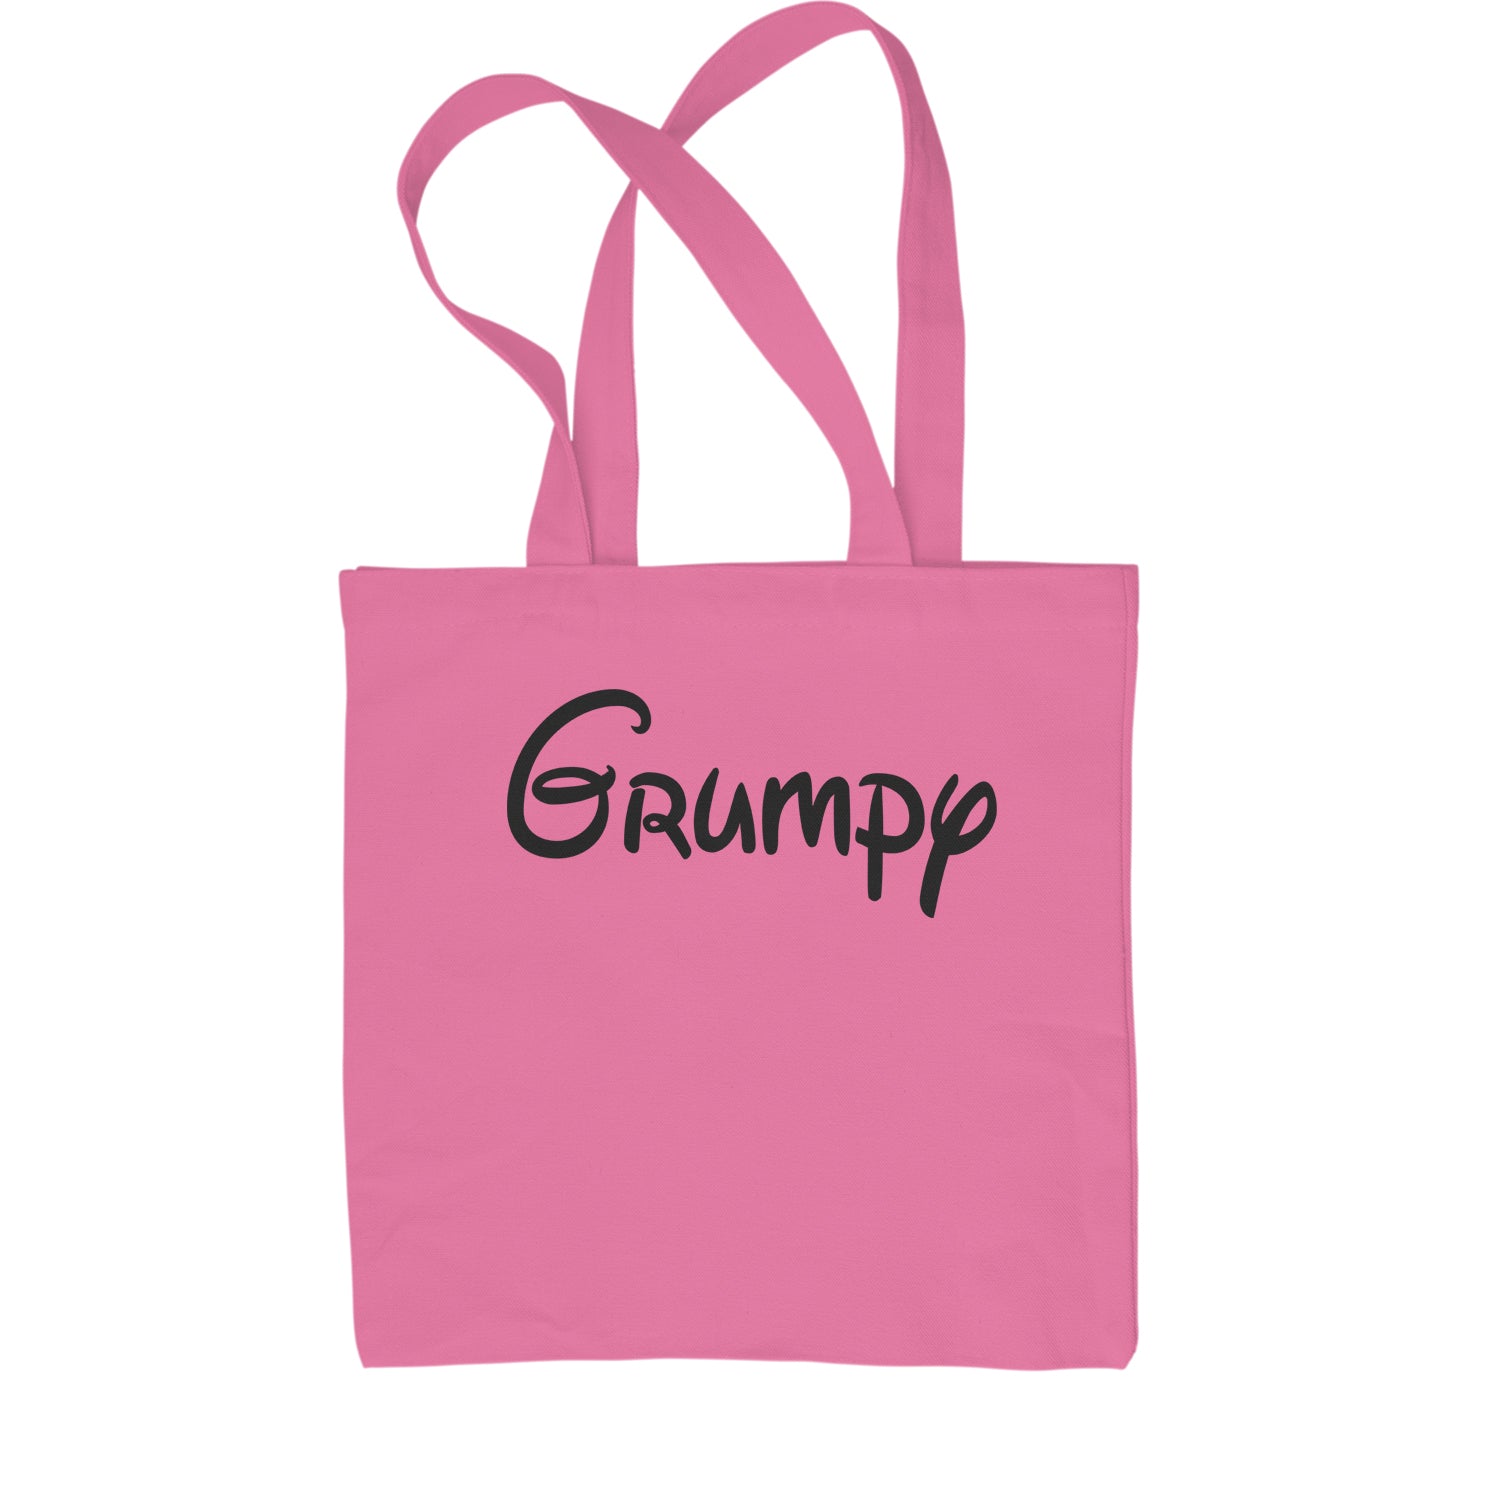 Grumpy - 7 Dwarfs Costume Shopping Tote Bag and, costume, dwarfs, group, halloween, matching, seven, snow, the, white by Expression Tees